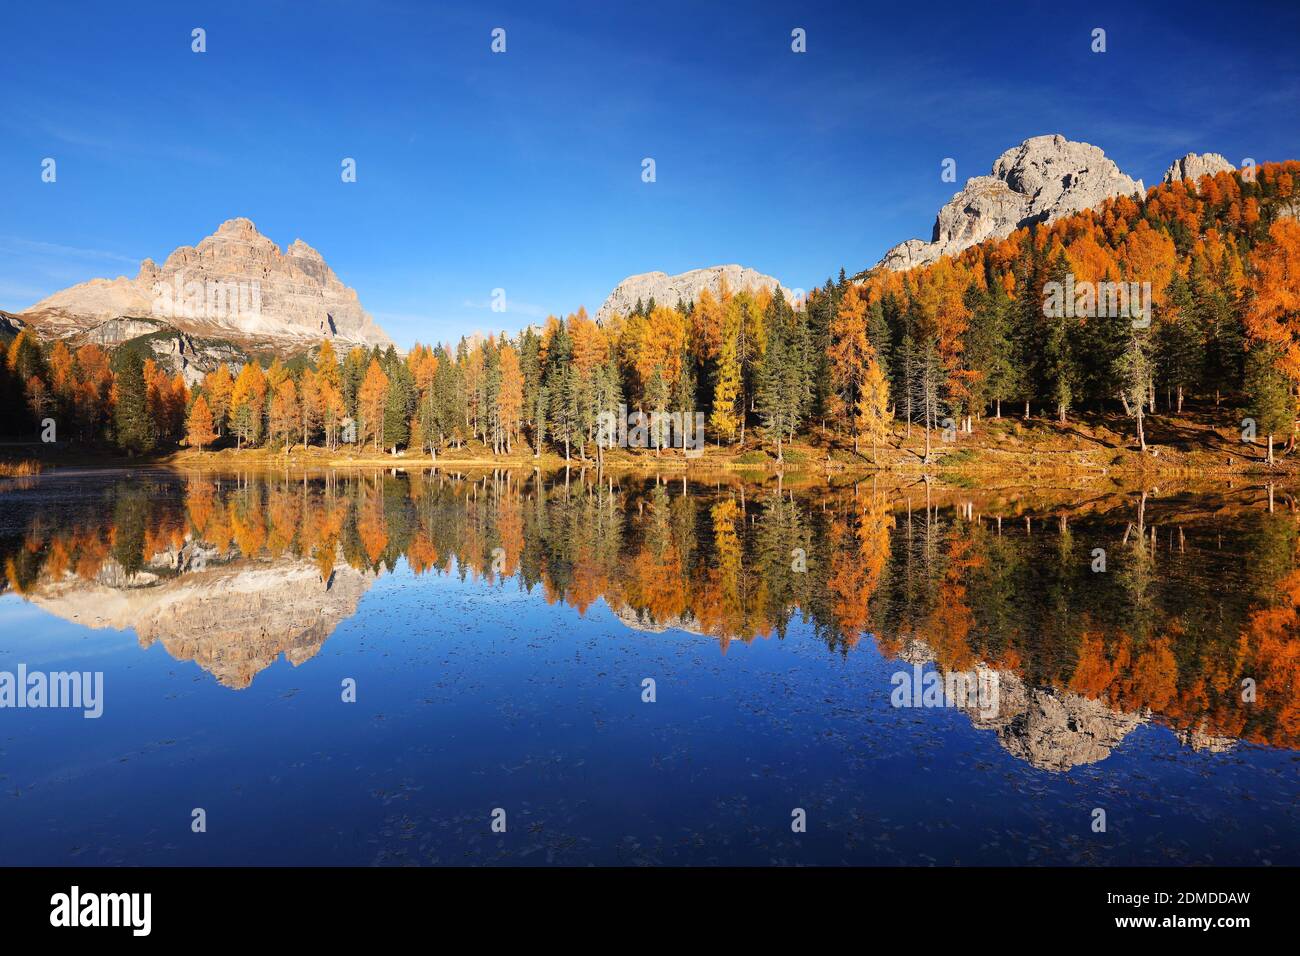 Reflection Of Trees In Lake Against Blue Sky Stock Photo